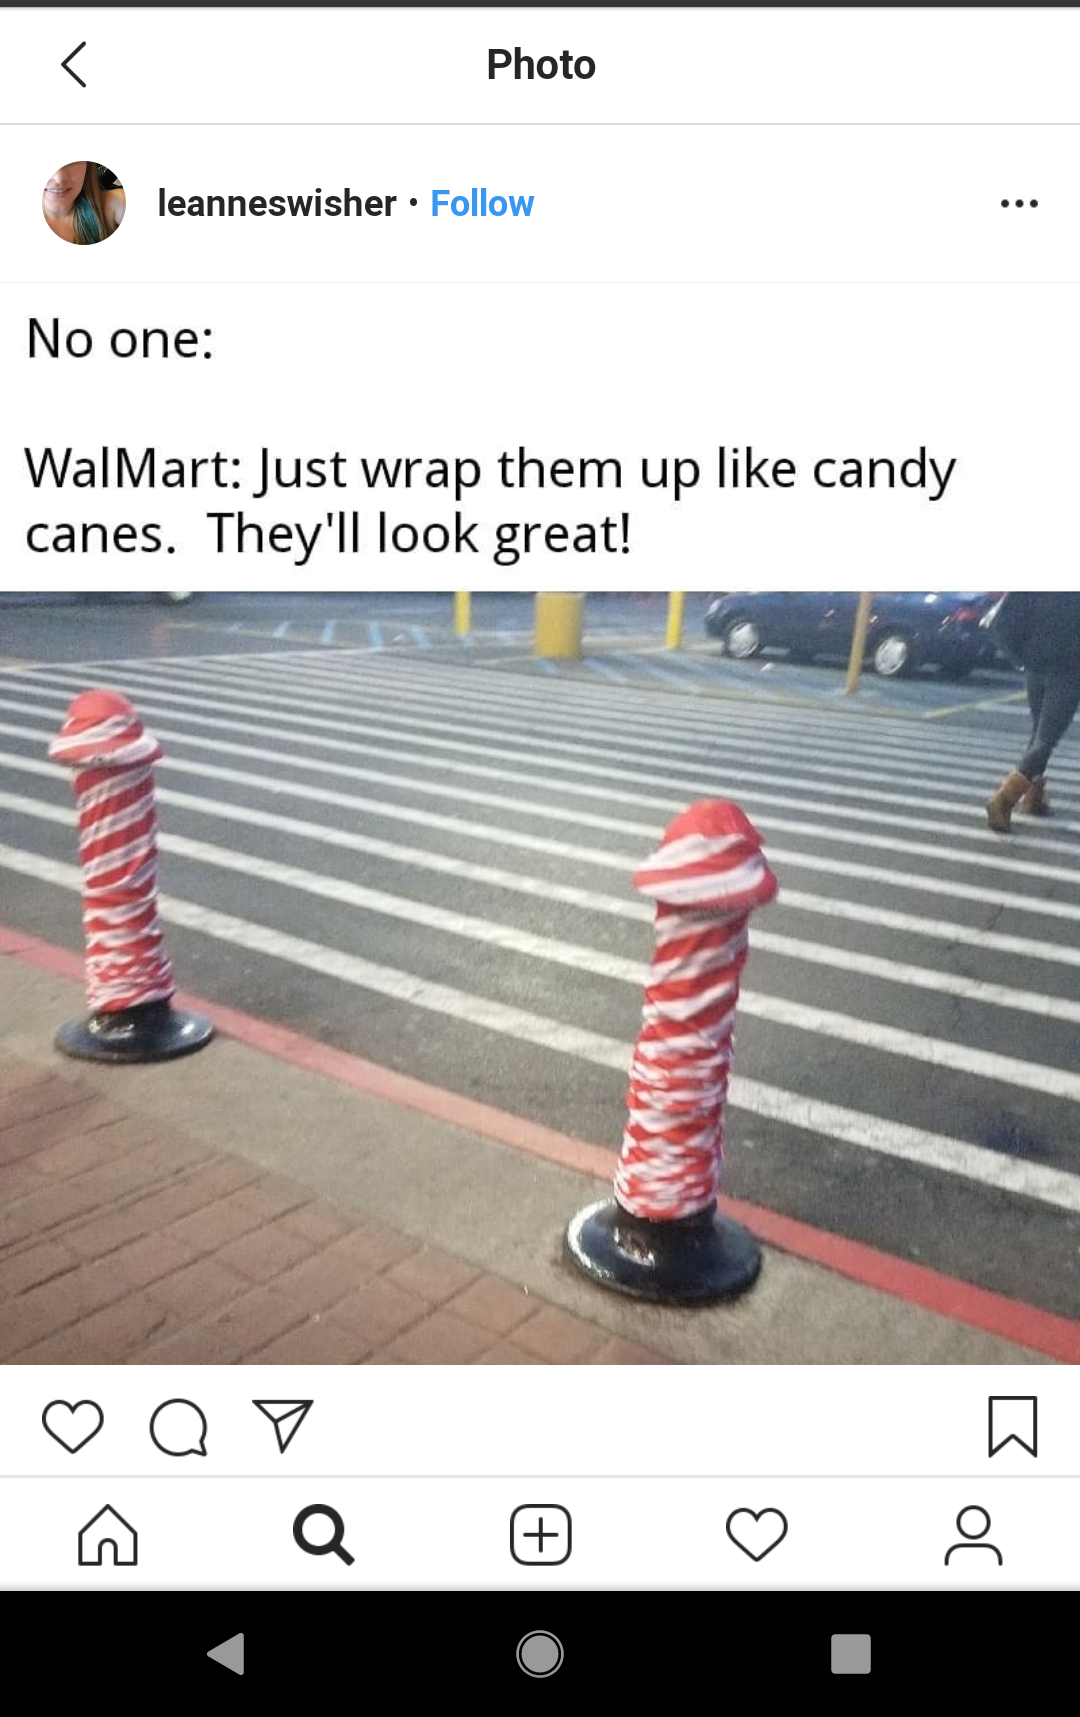 christmas meme - angle - Photo leanneswisher . No one Wal Mart Just wrap them up candy canes. They'll look great! Nr Qy